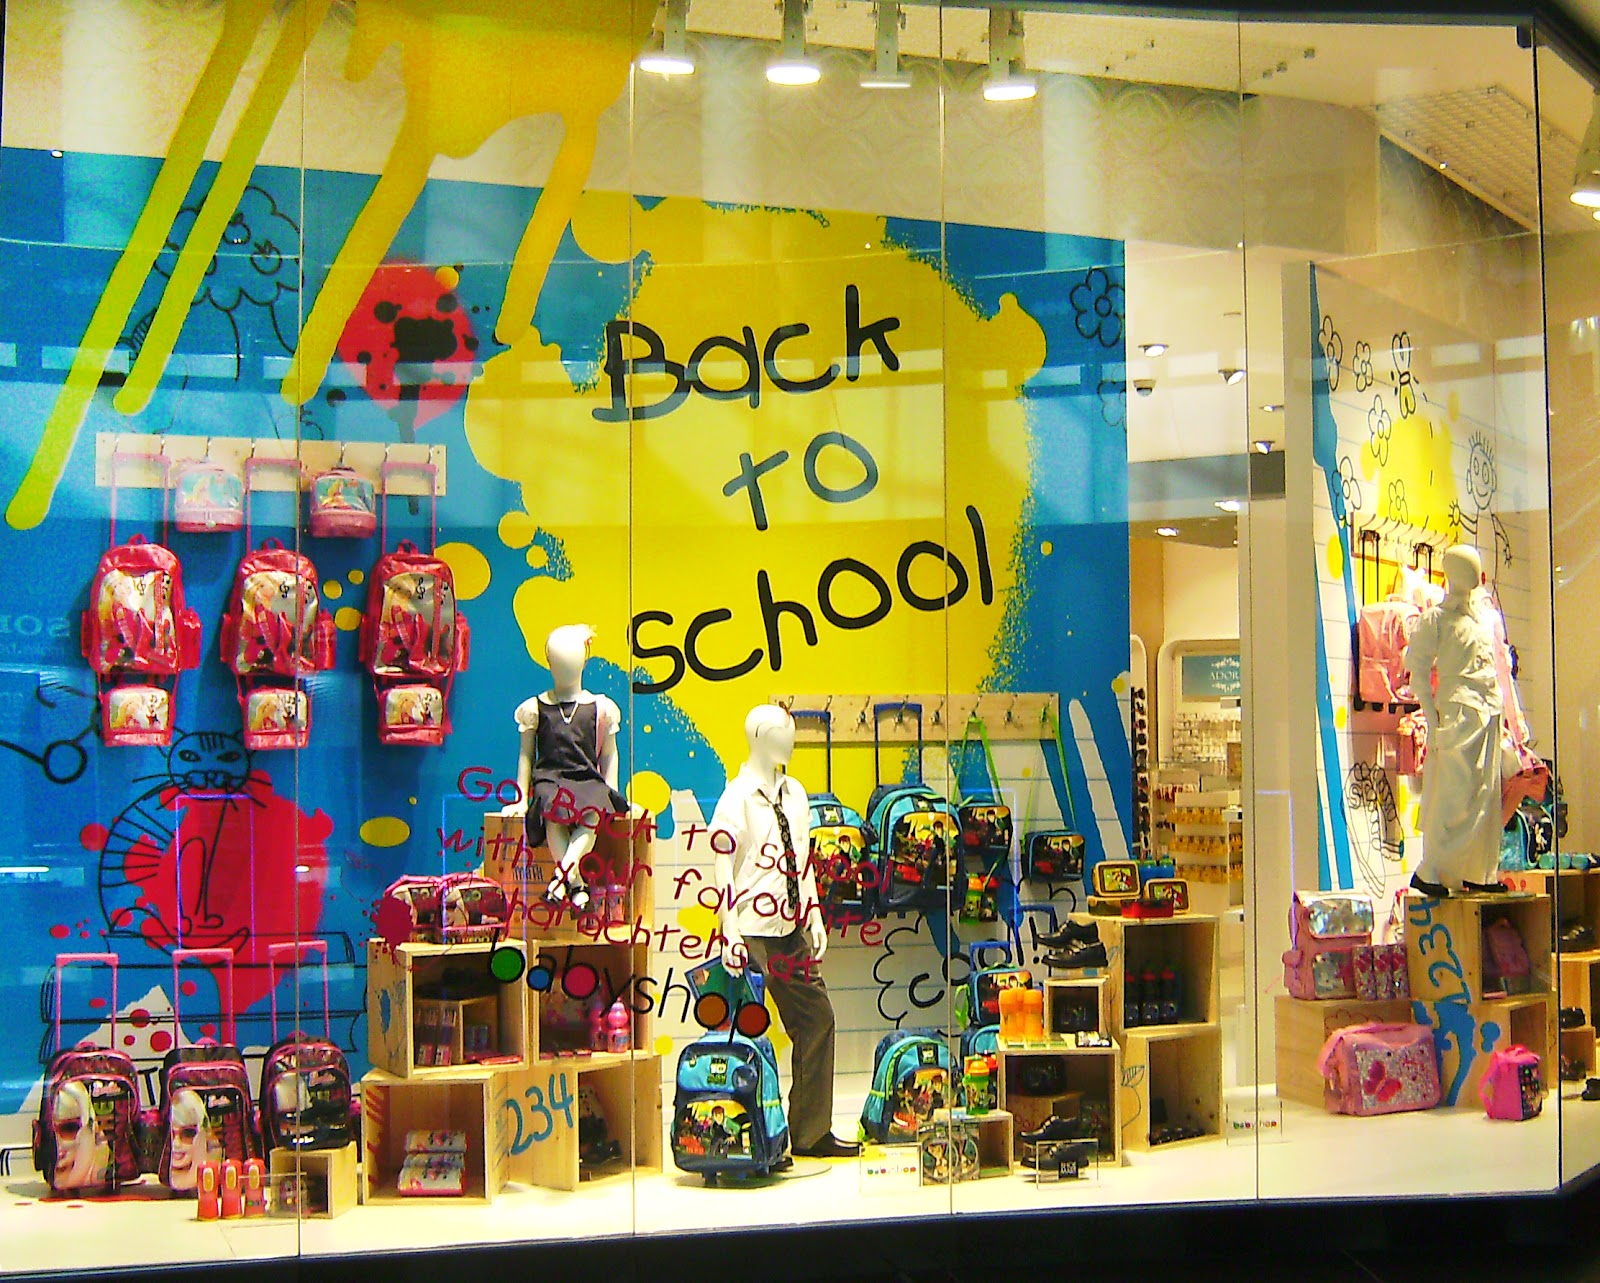 Back to school signs with window display in a retail store